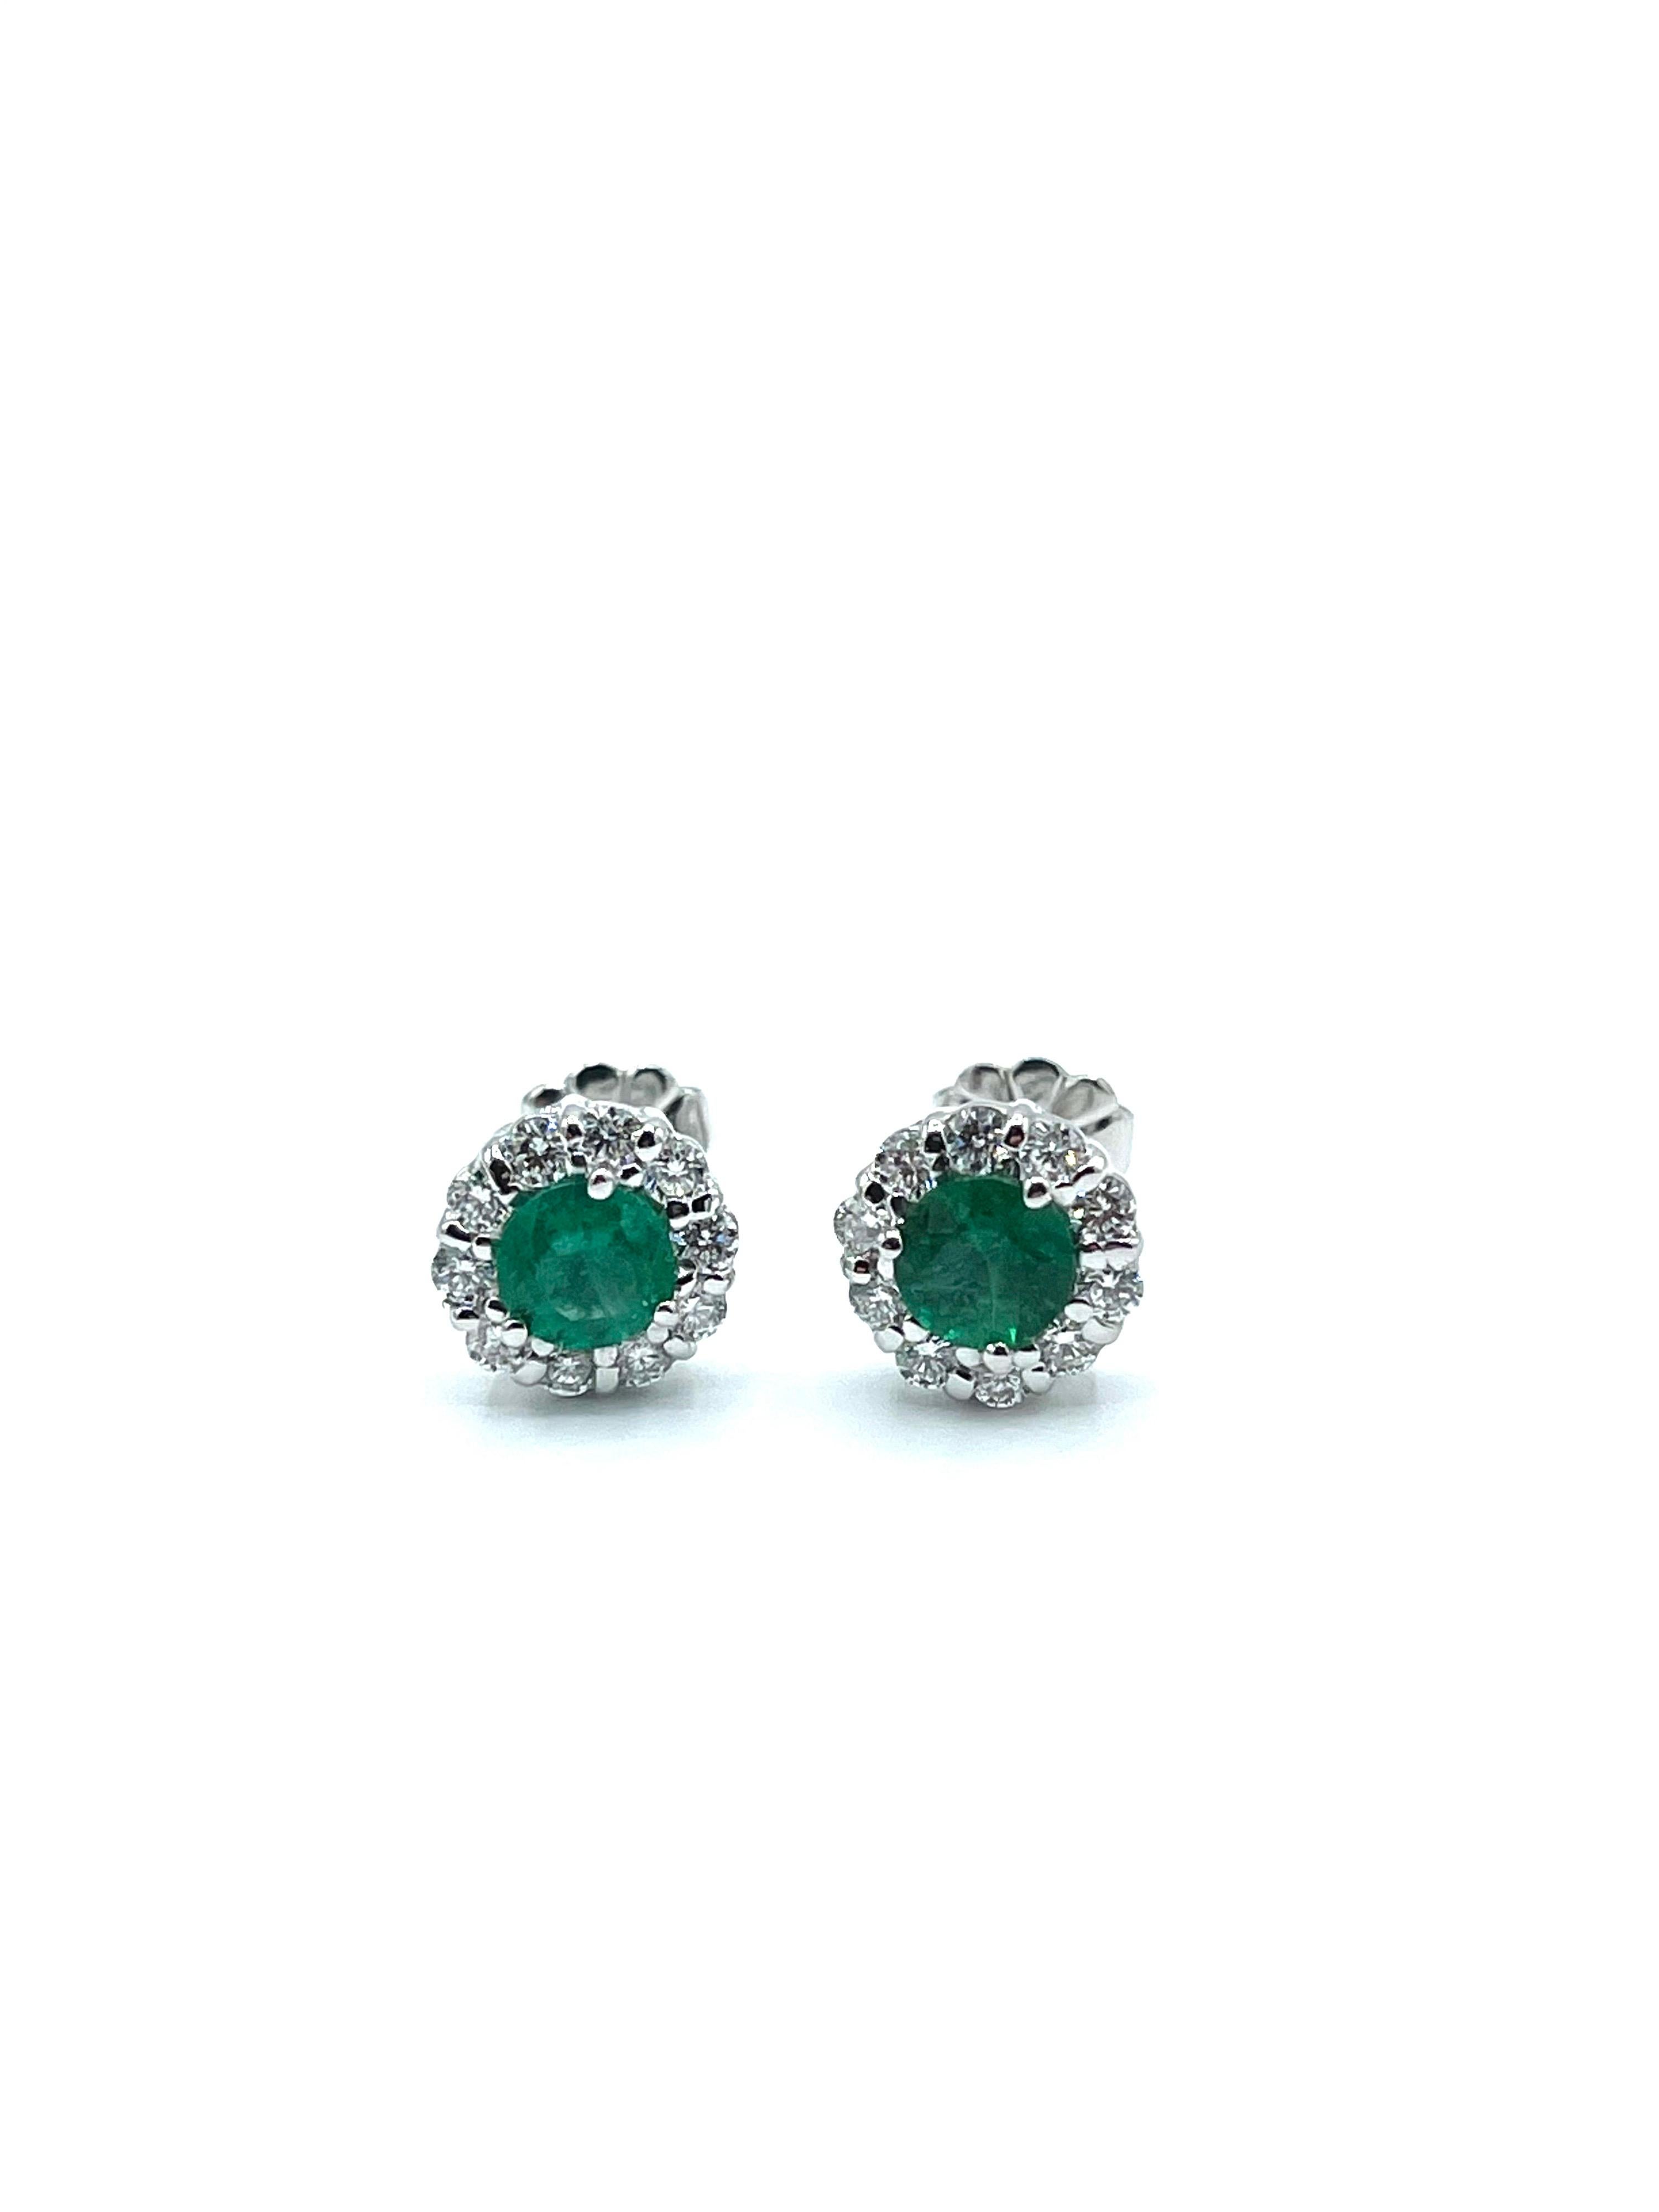 A pair of vibrant Emerald and Diamond stud earrings!  The round cut Emeralds are set in four prongs, surrounded by a single row of round brilliant cut Diamonds in 18kt white gold.  The two Emeralds have a total weight of 0.75 carats, and the 20